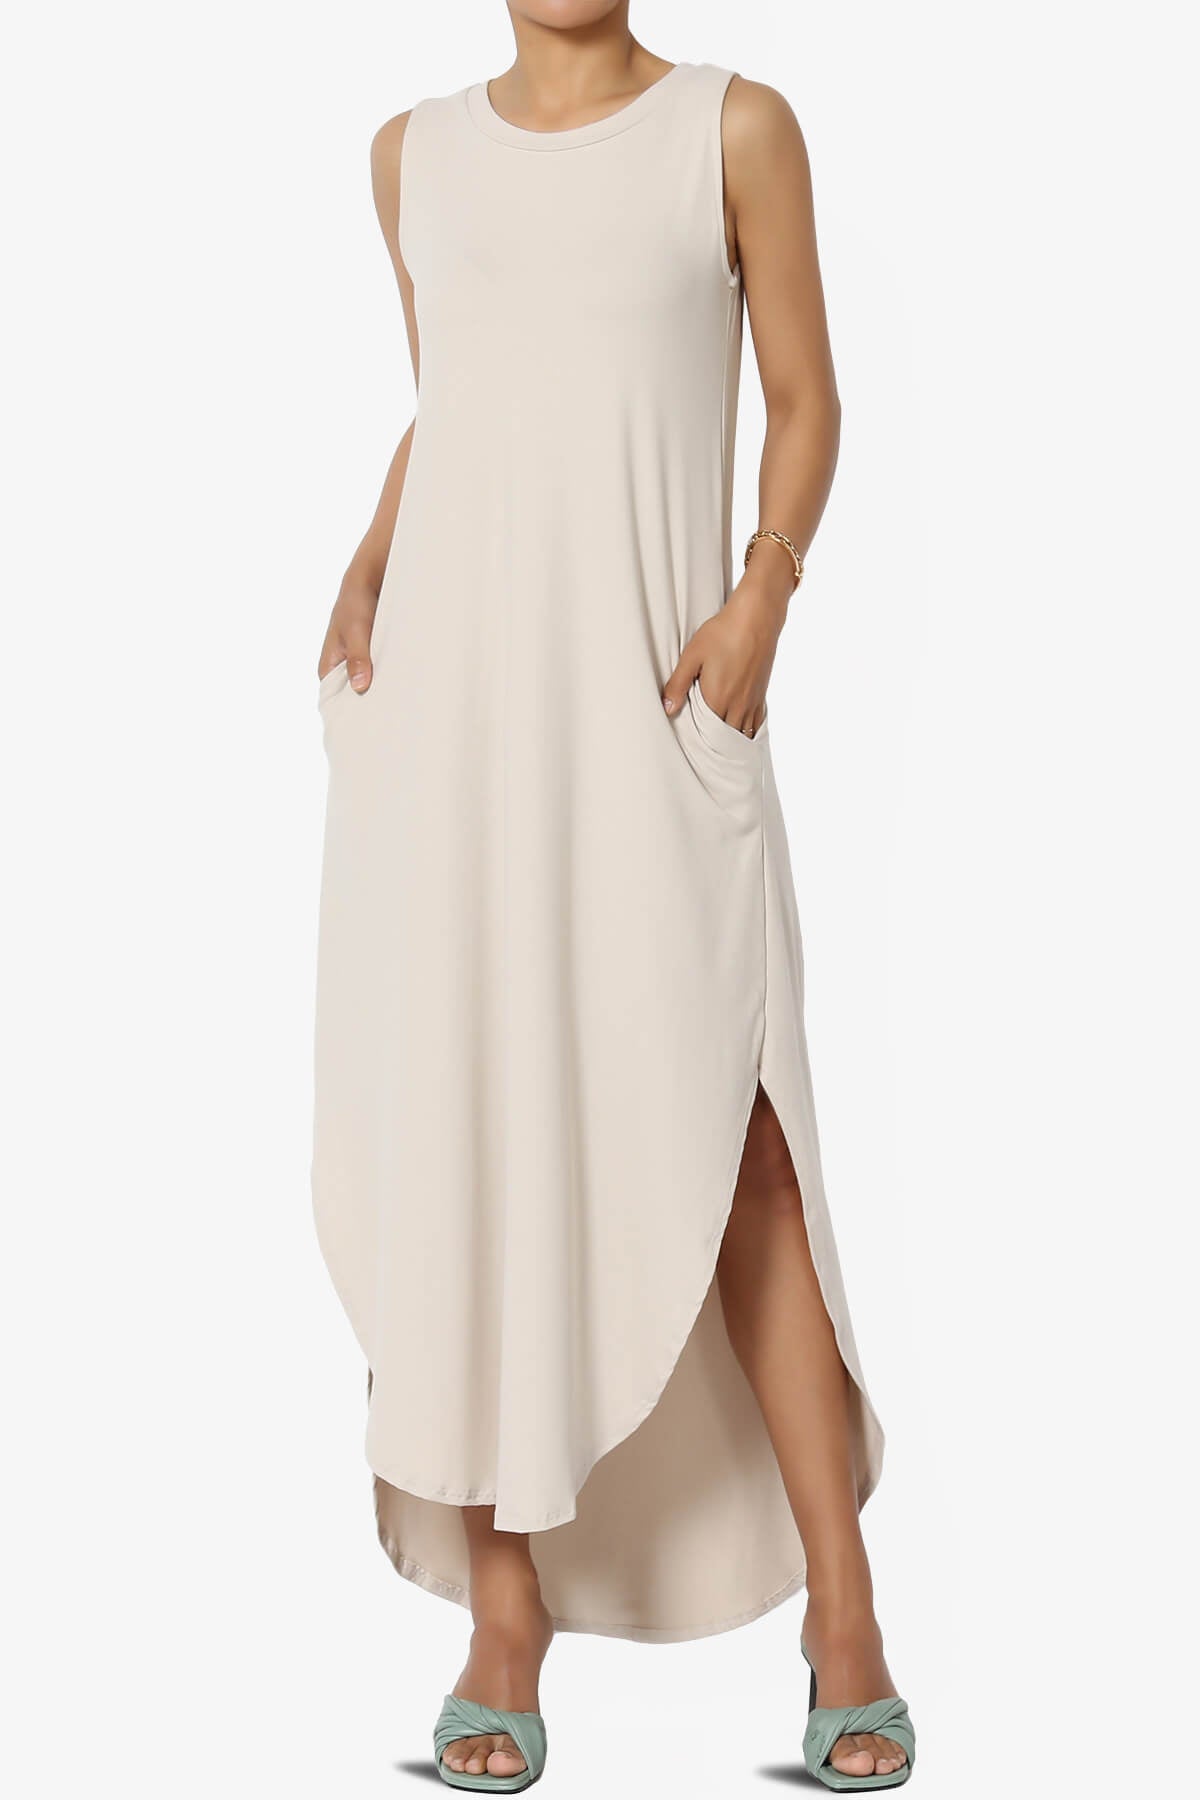 Load image into Gallery viewer, Rozlyn Sleeveless Slit Maxi Dress SAND BEIGE_1
